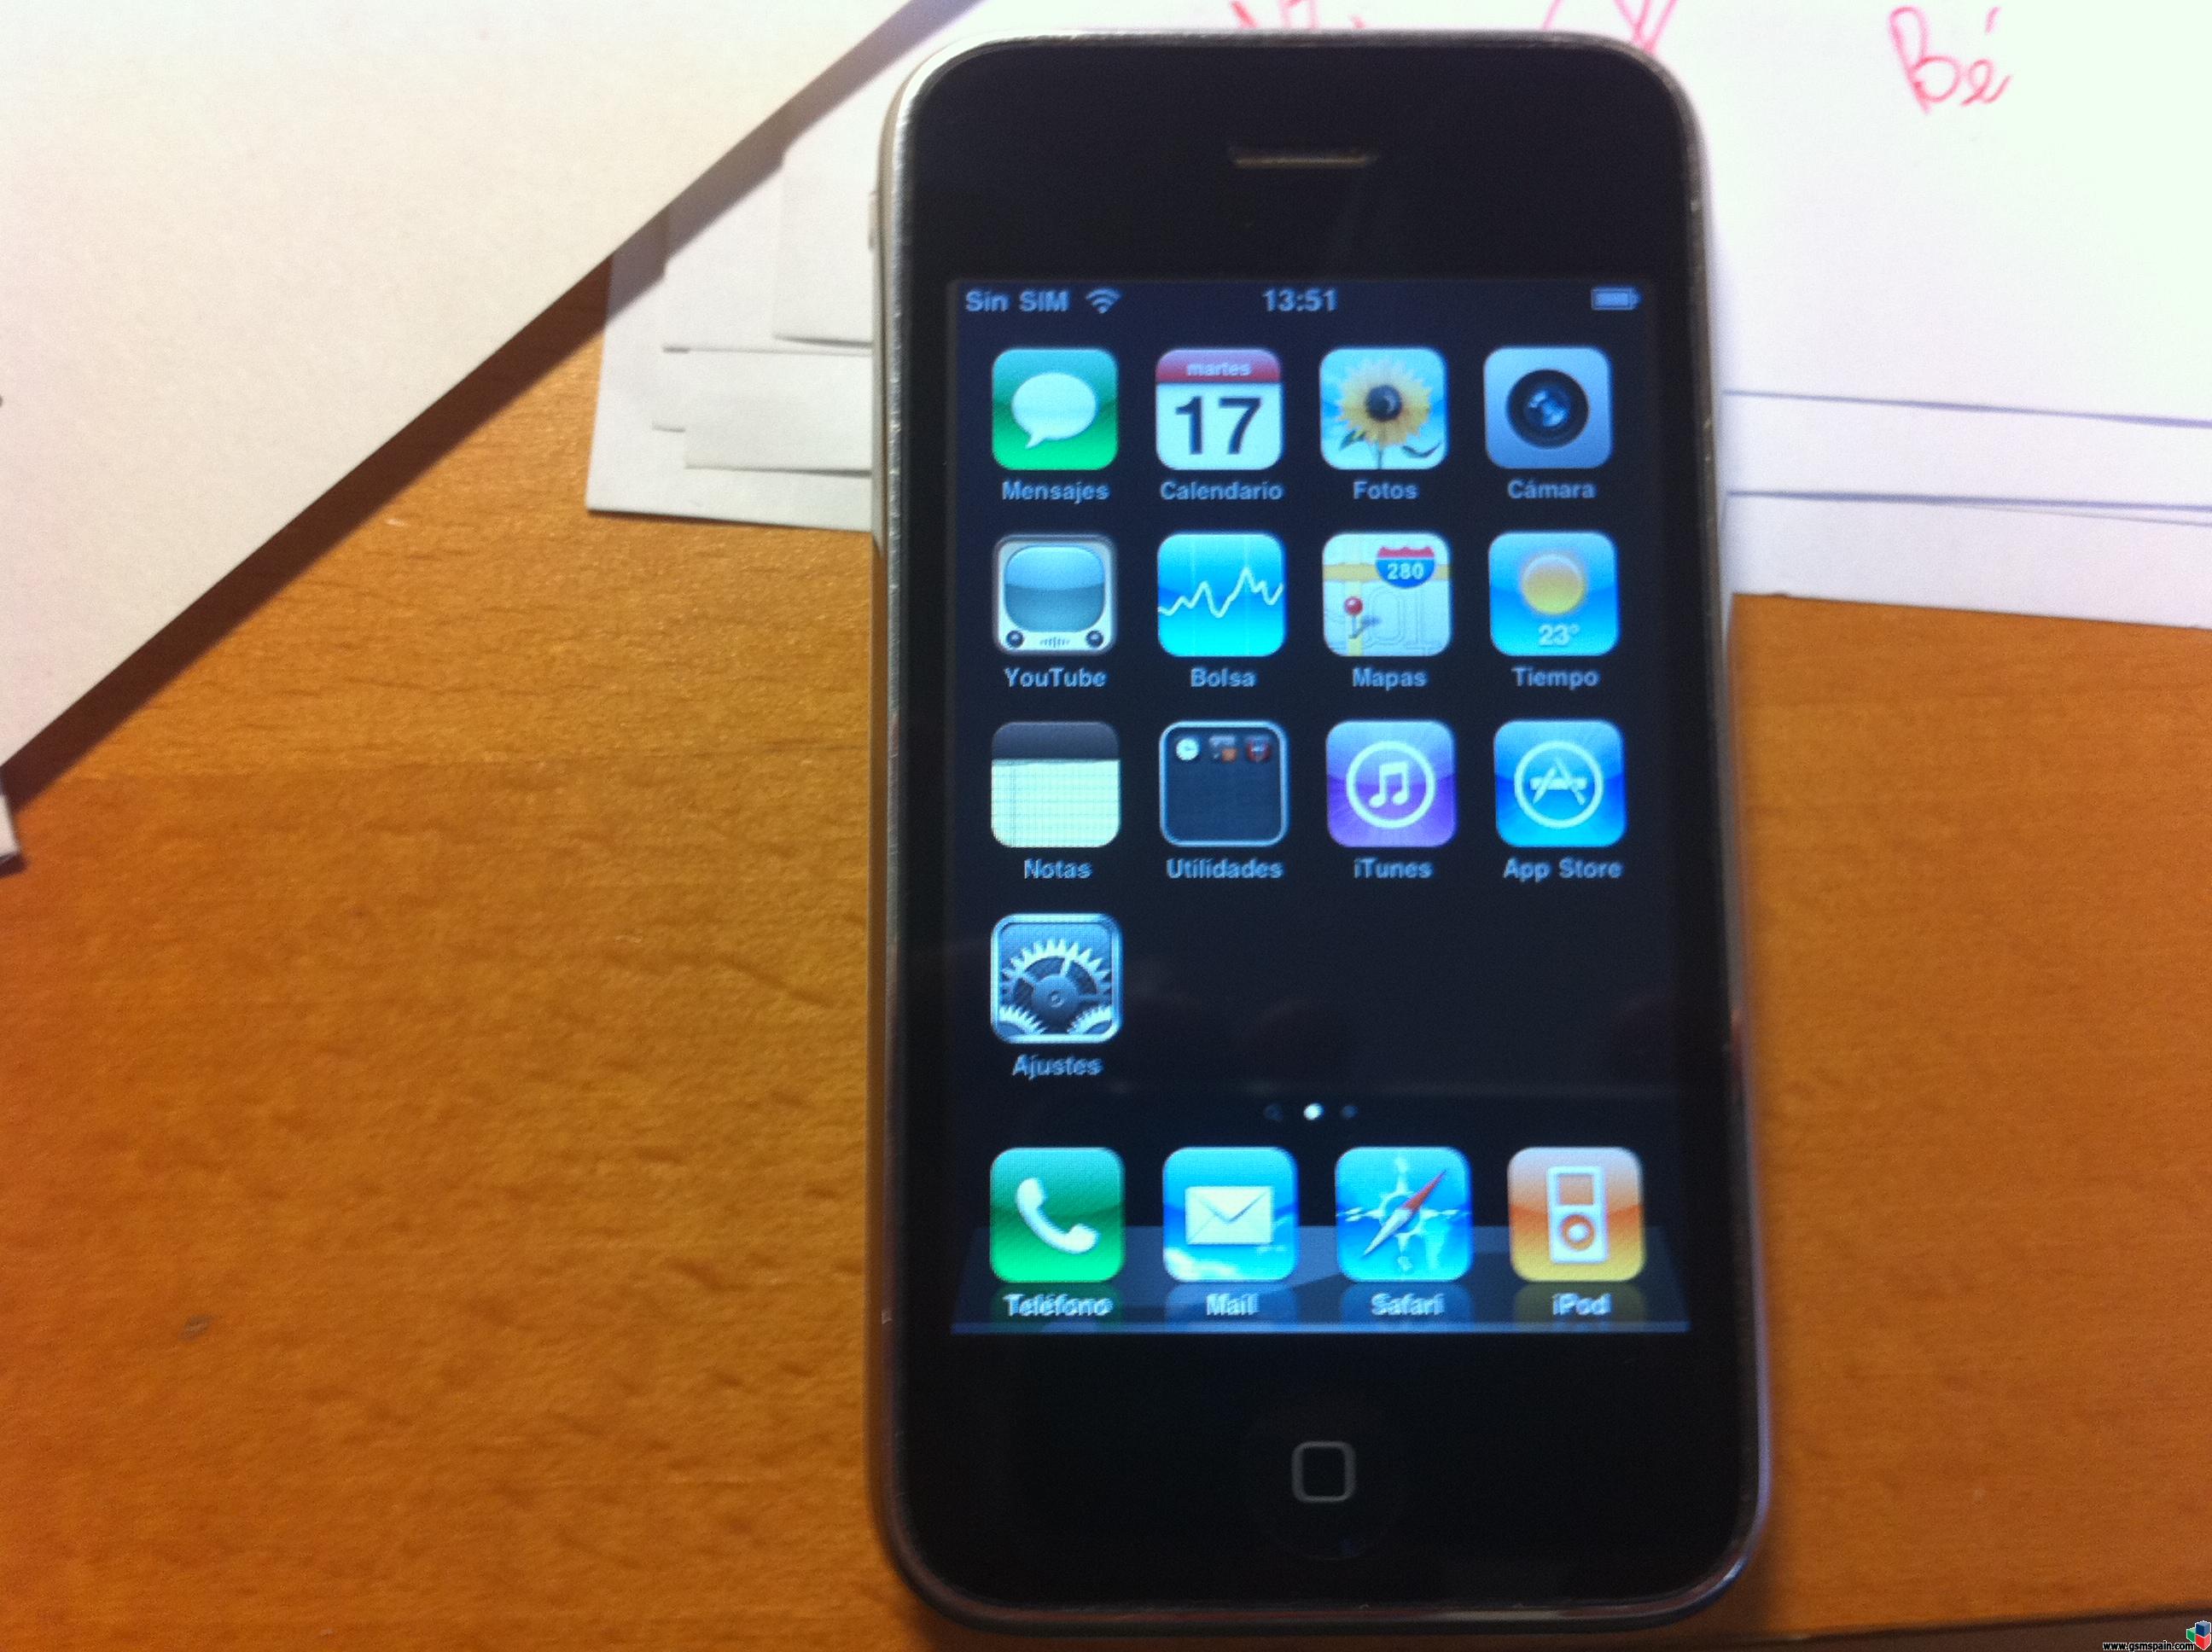 Compro iphone 3g